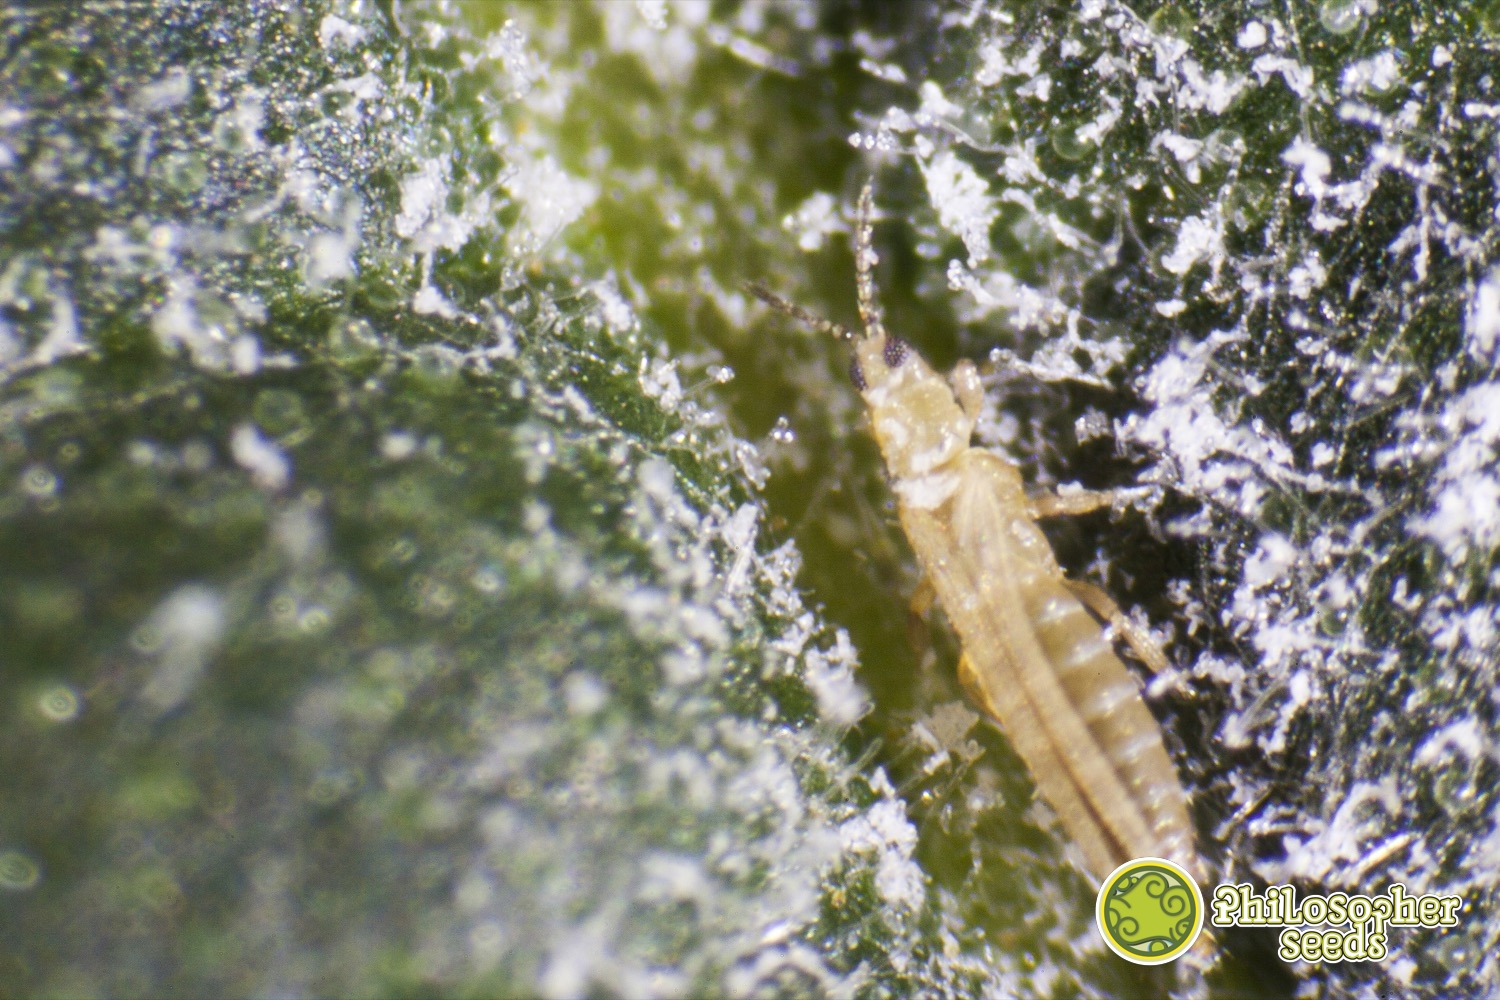 How to treat thrips on cannabis plants